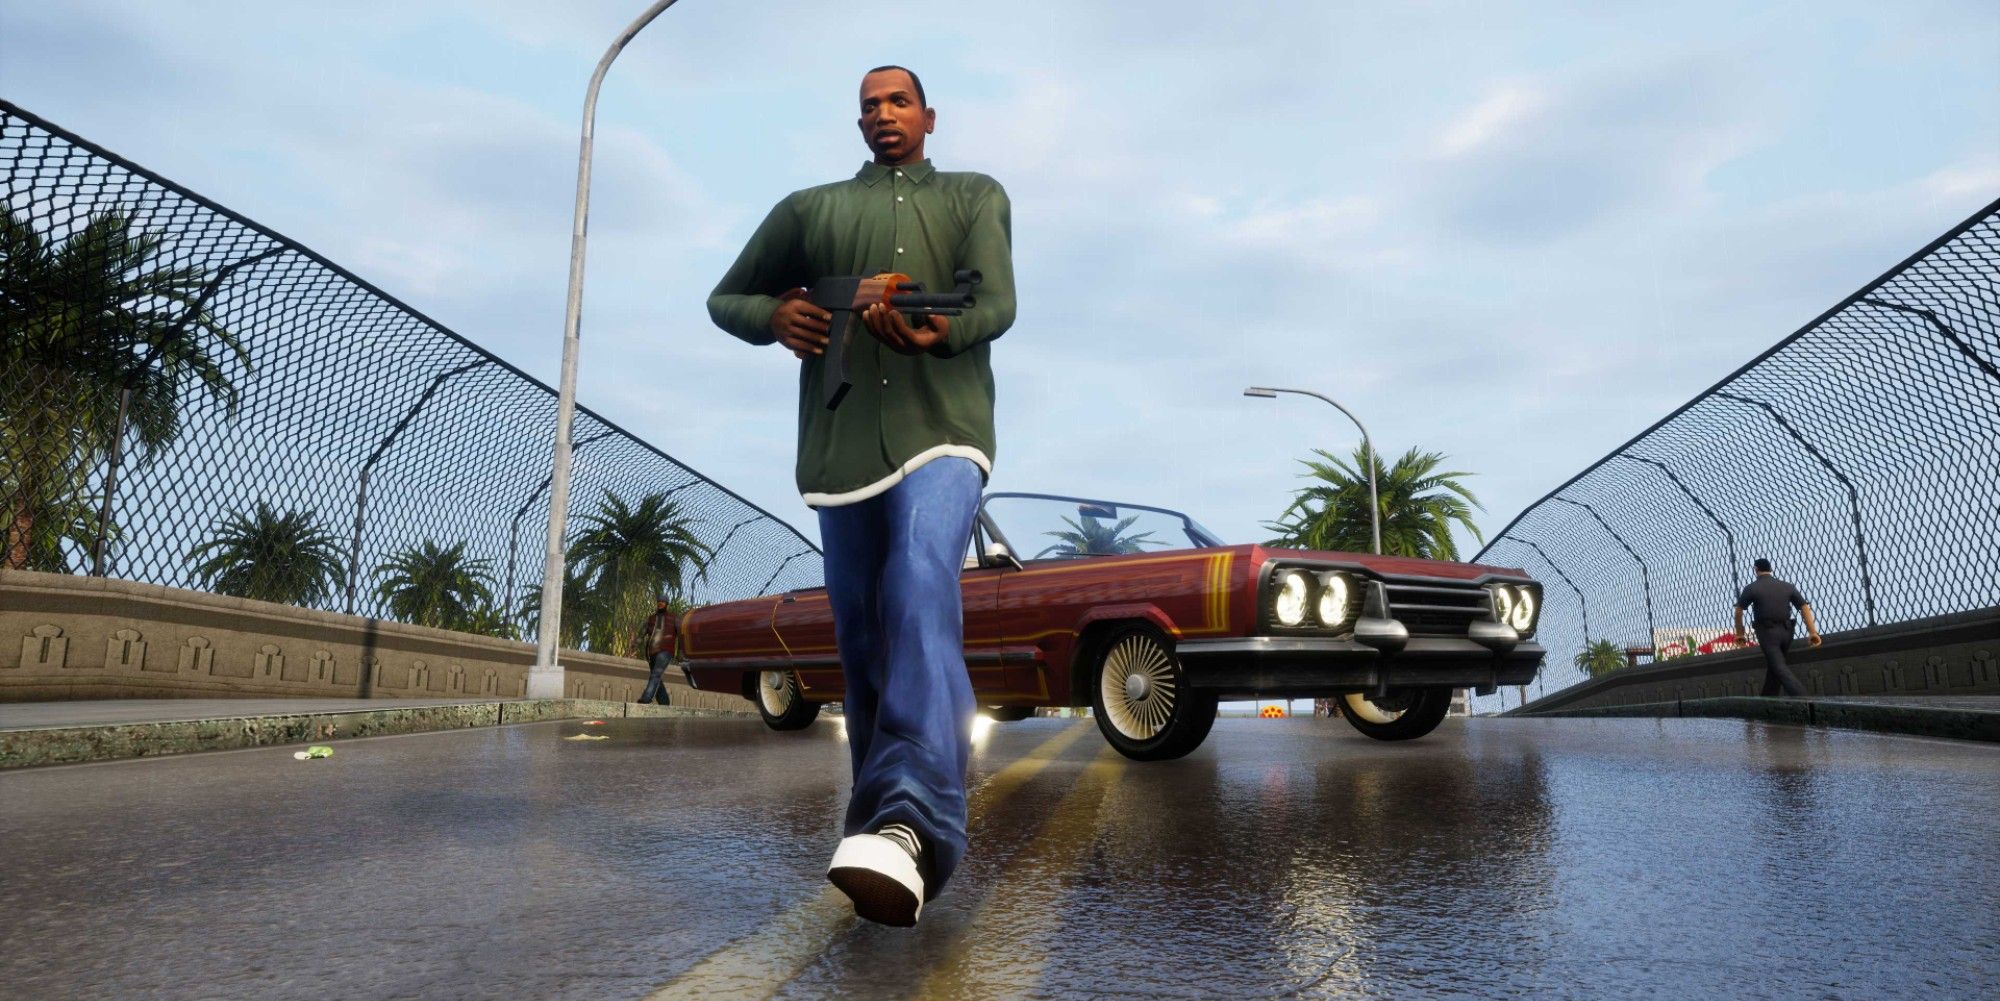 New Steam Bundle Suggests GTA Trilogy Release is Coming